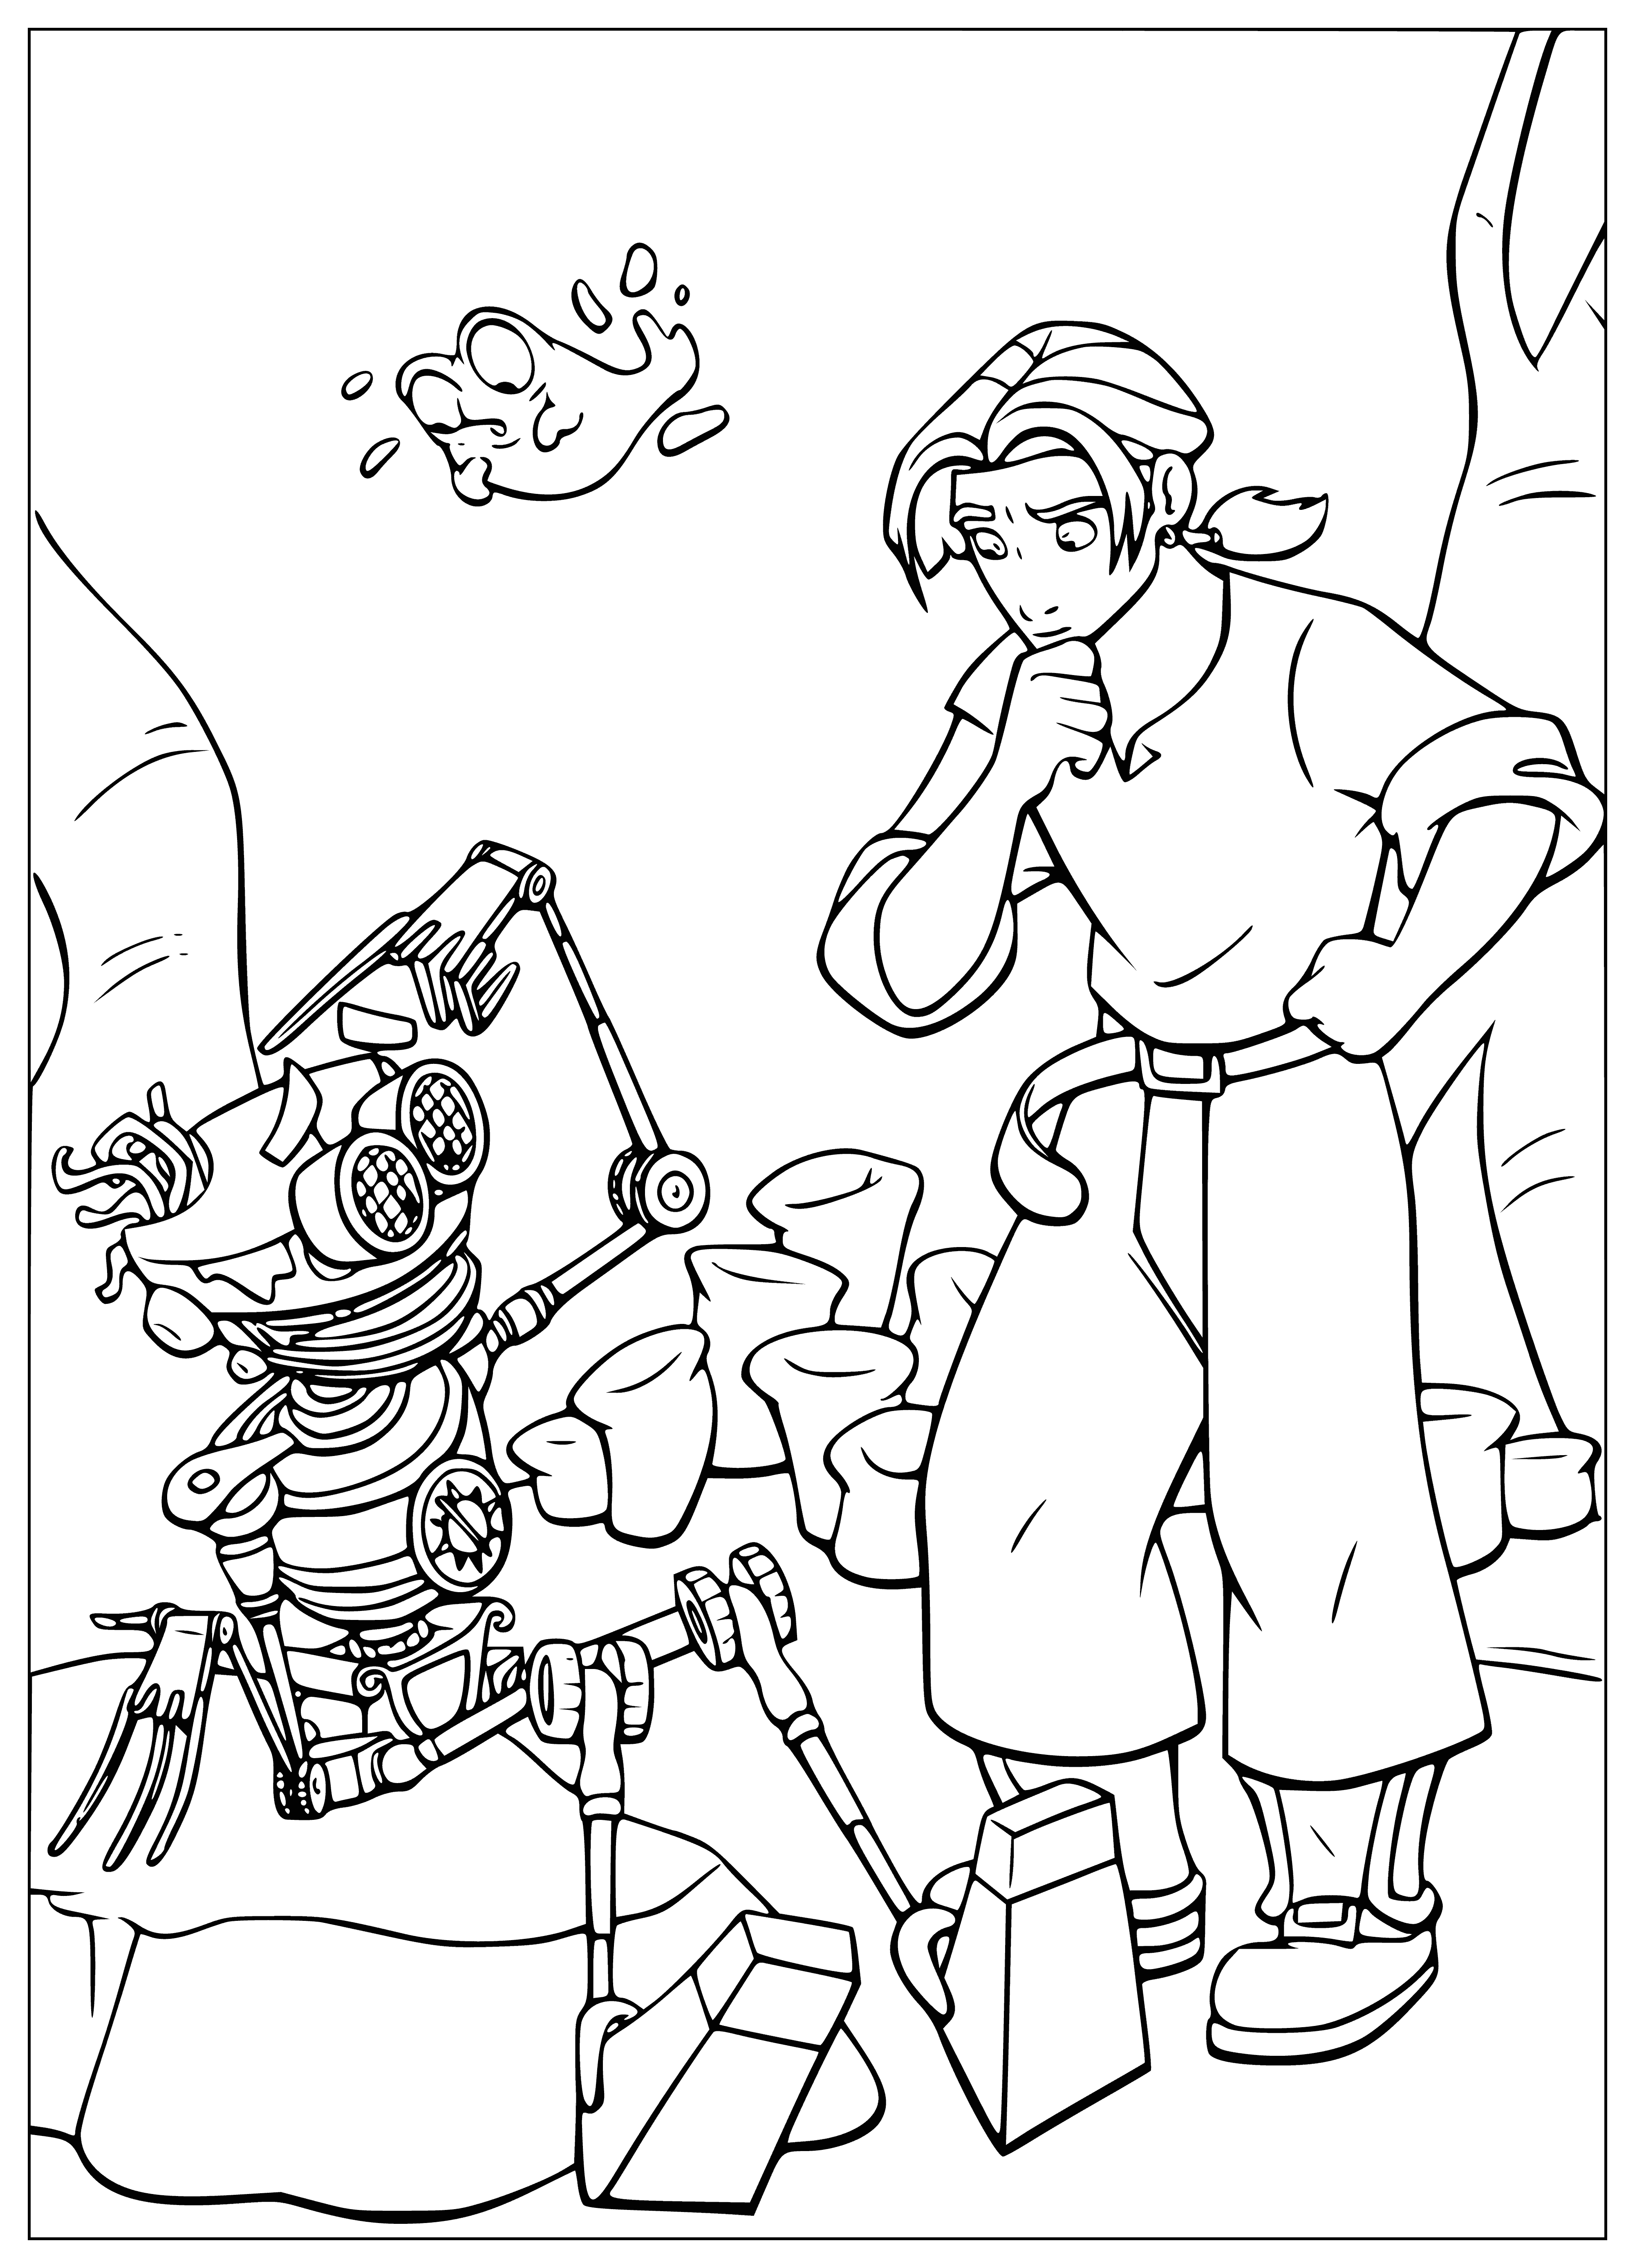 coloring page: In treasure planet, a huge golden treasure chest with a green gem in the center is overflowing with gold coins, 3 golden goblets, and a golden necklace.